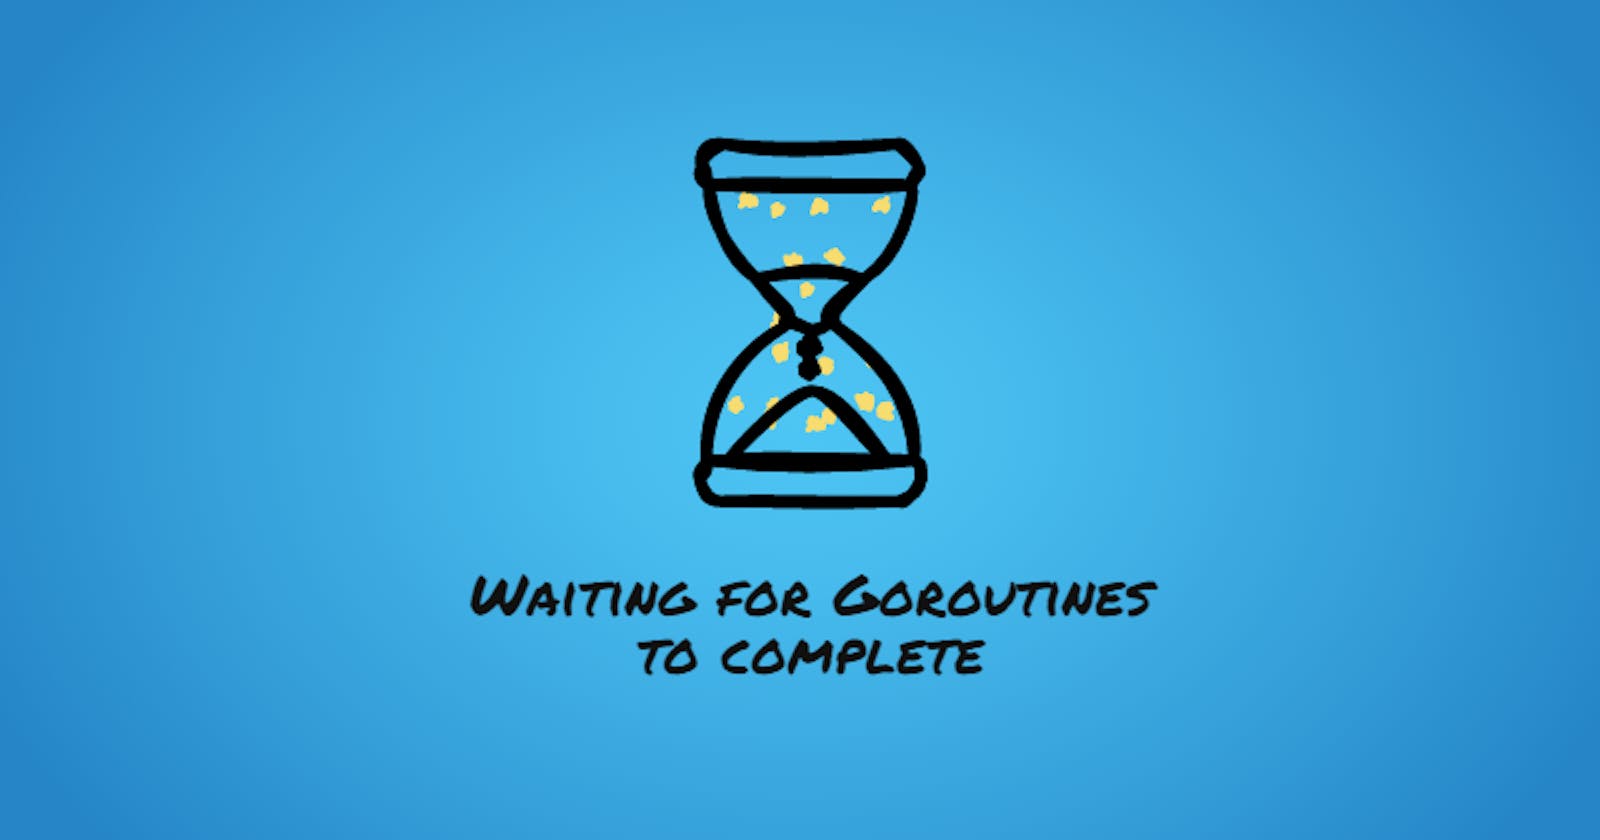 Waiting for Goroutines to complete